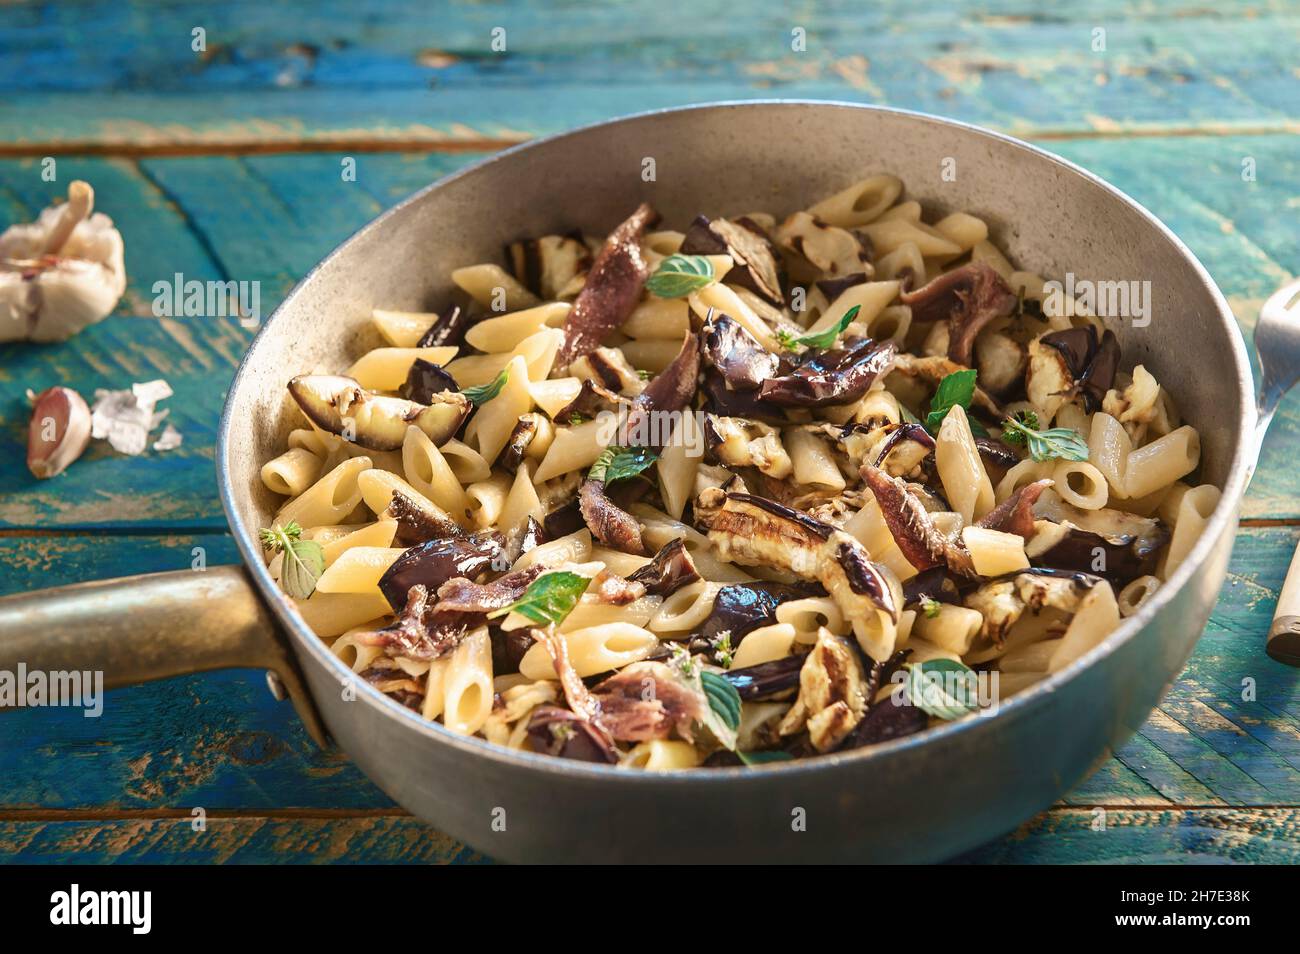 Penne con melanzane e menta (pasta with grilled aubergines and peppermint, Italy) Stock Photo